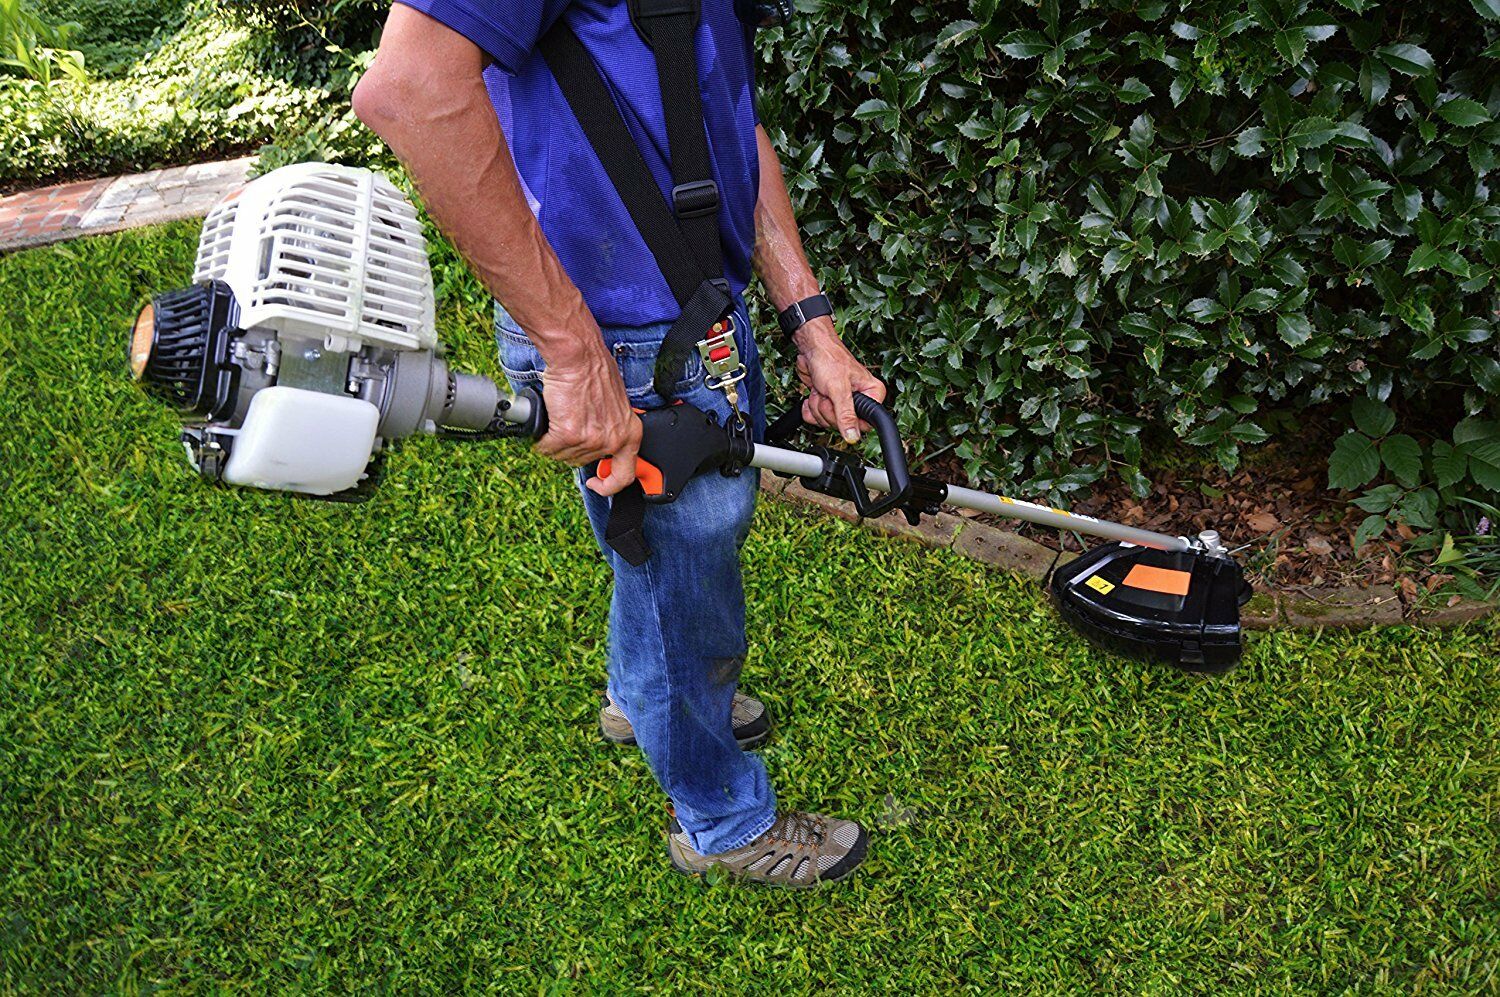 8 Best Brush Cutters - Great Addition to Your String Trimmer (Spring 2022)